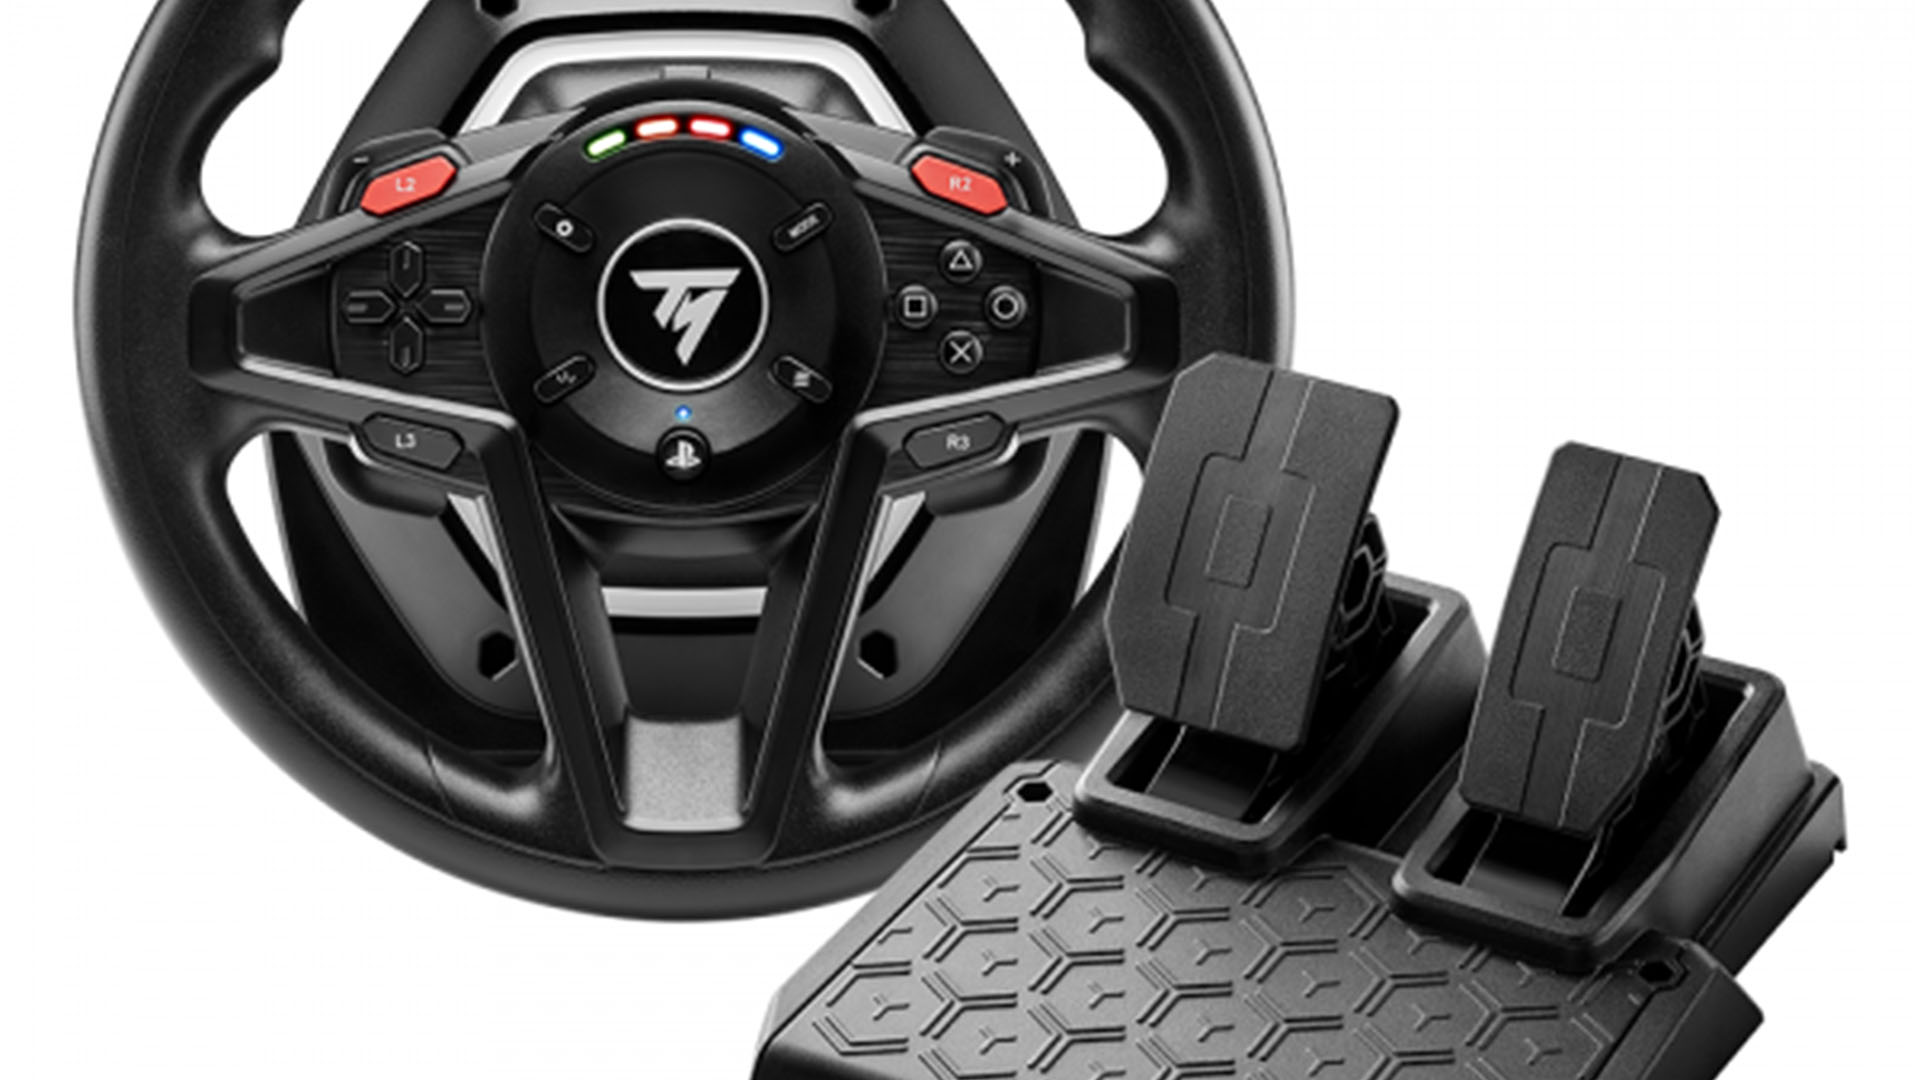 Thrustmaster T128 Review: The ideal Christmas present